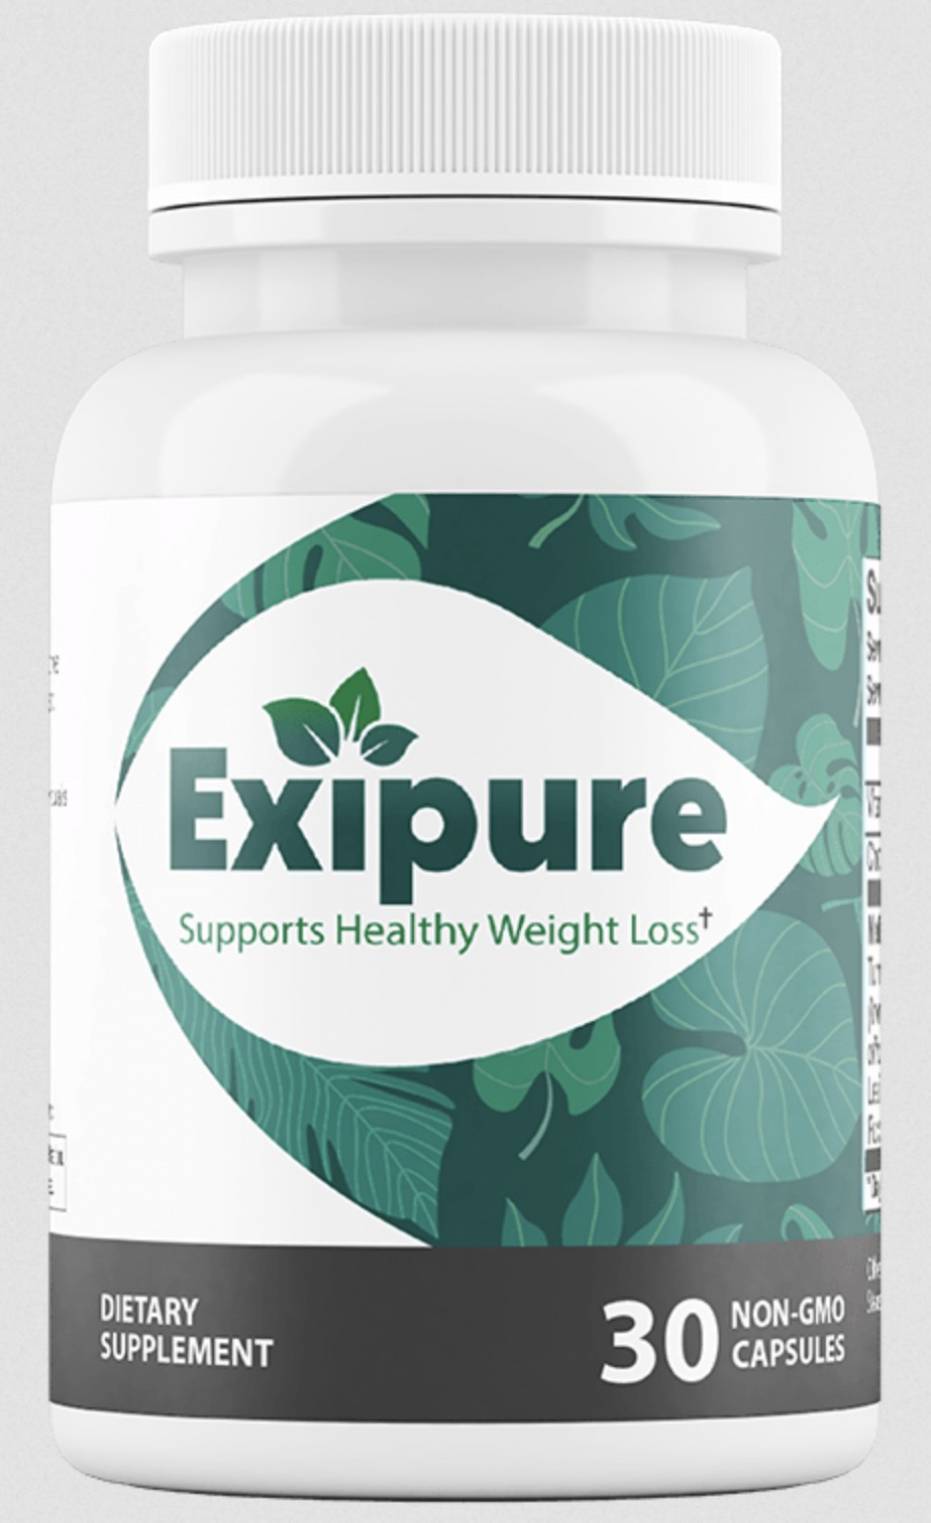 Is Exipure A Good Product